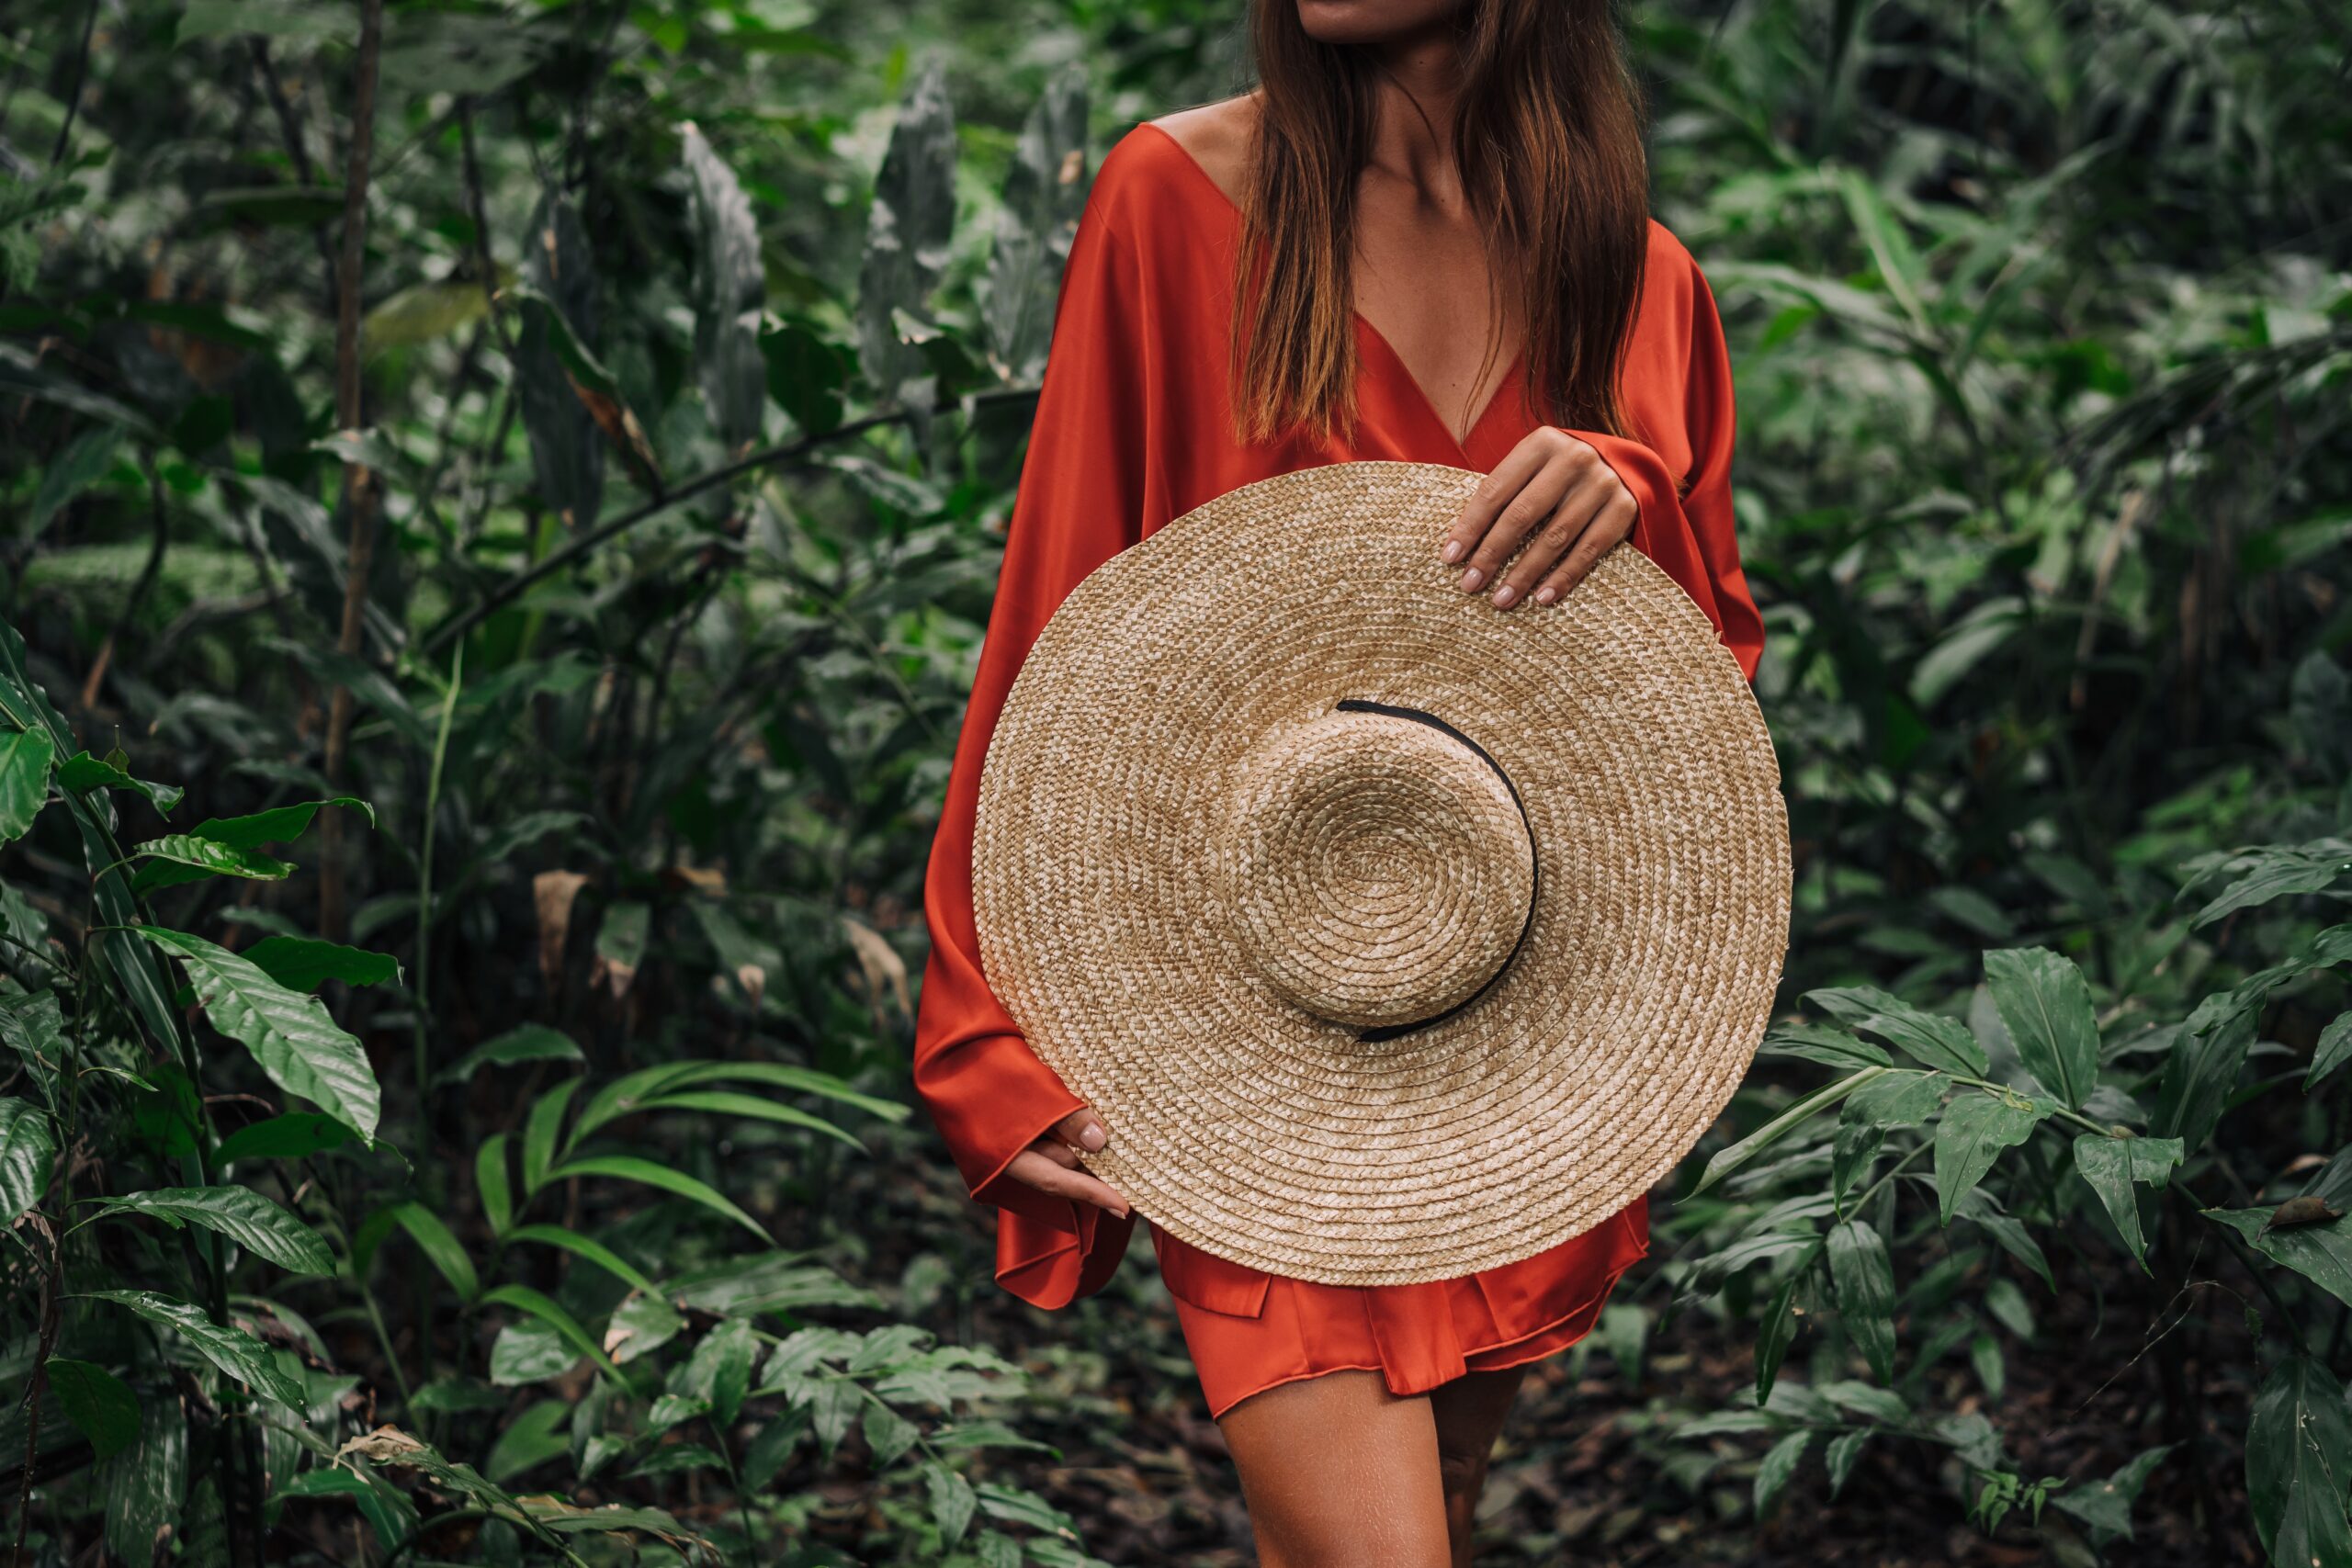 woman holding a large sun hat